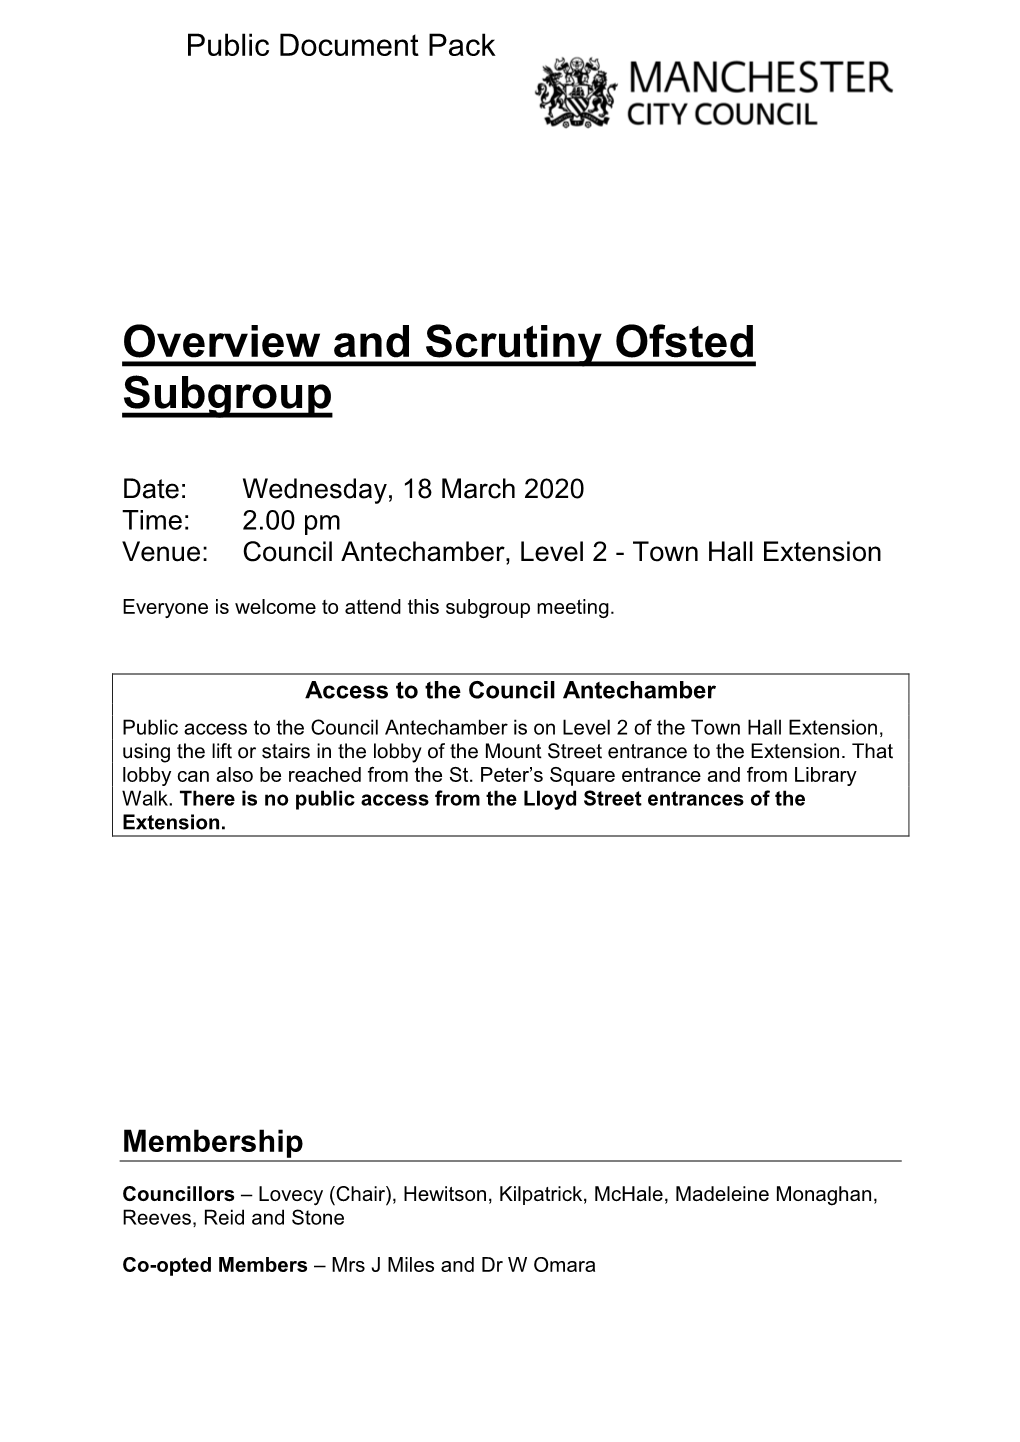 (Public Pack)Agenda Document for Overview and Scrutiny Ofsted